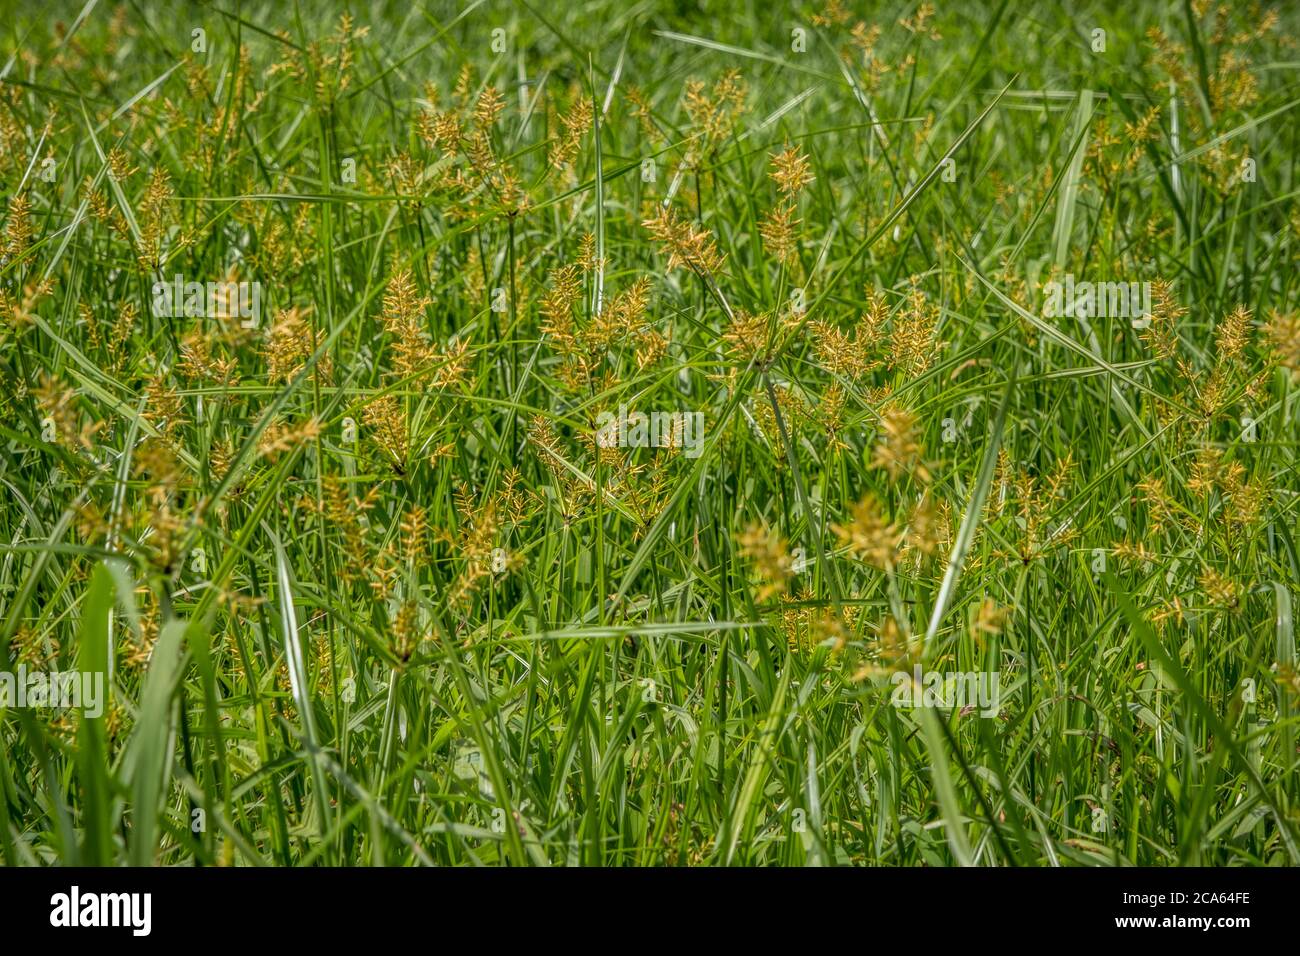 Growing in an opened field in a wet area a cluster of umbrella sedges with vibrant golden bracts against the green grasses on a sunny day in summer Stock Photo